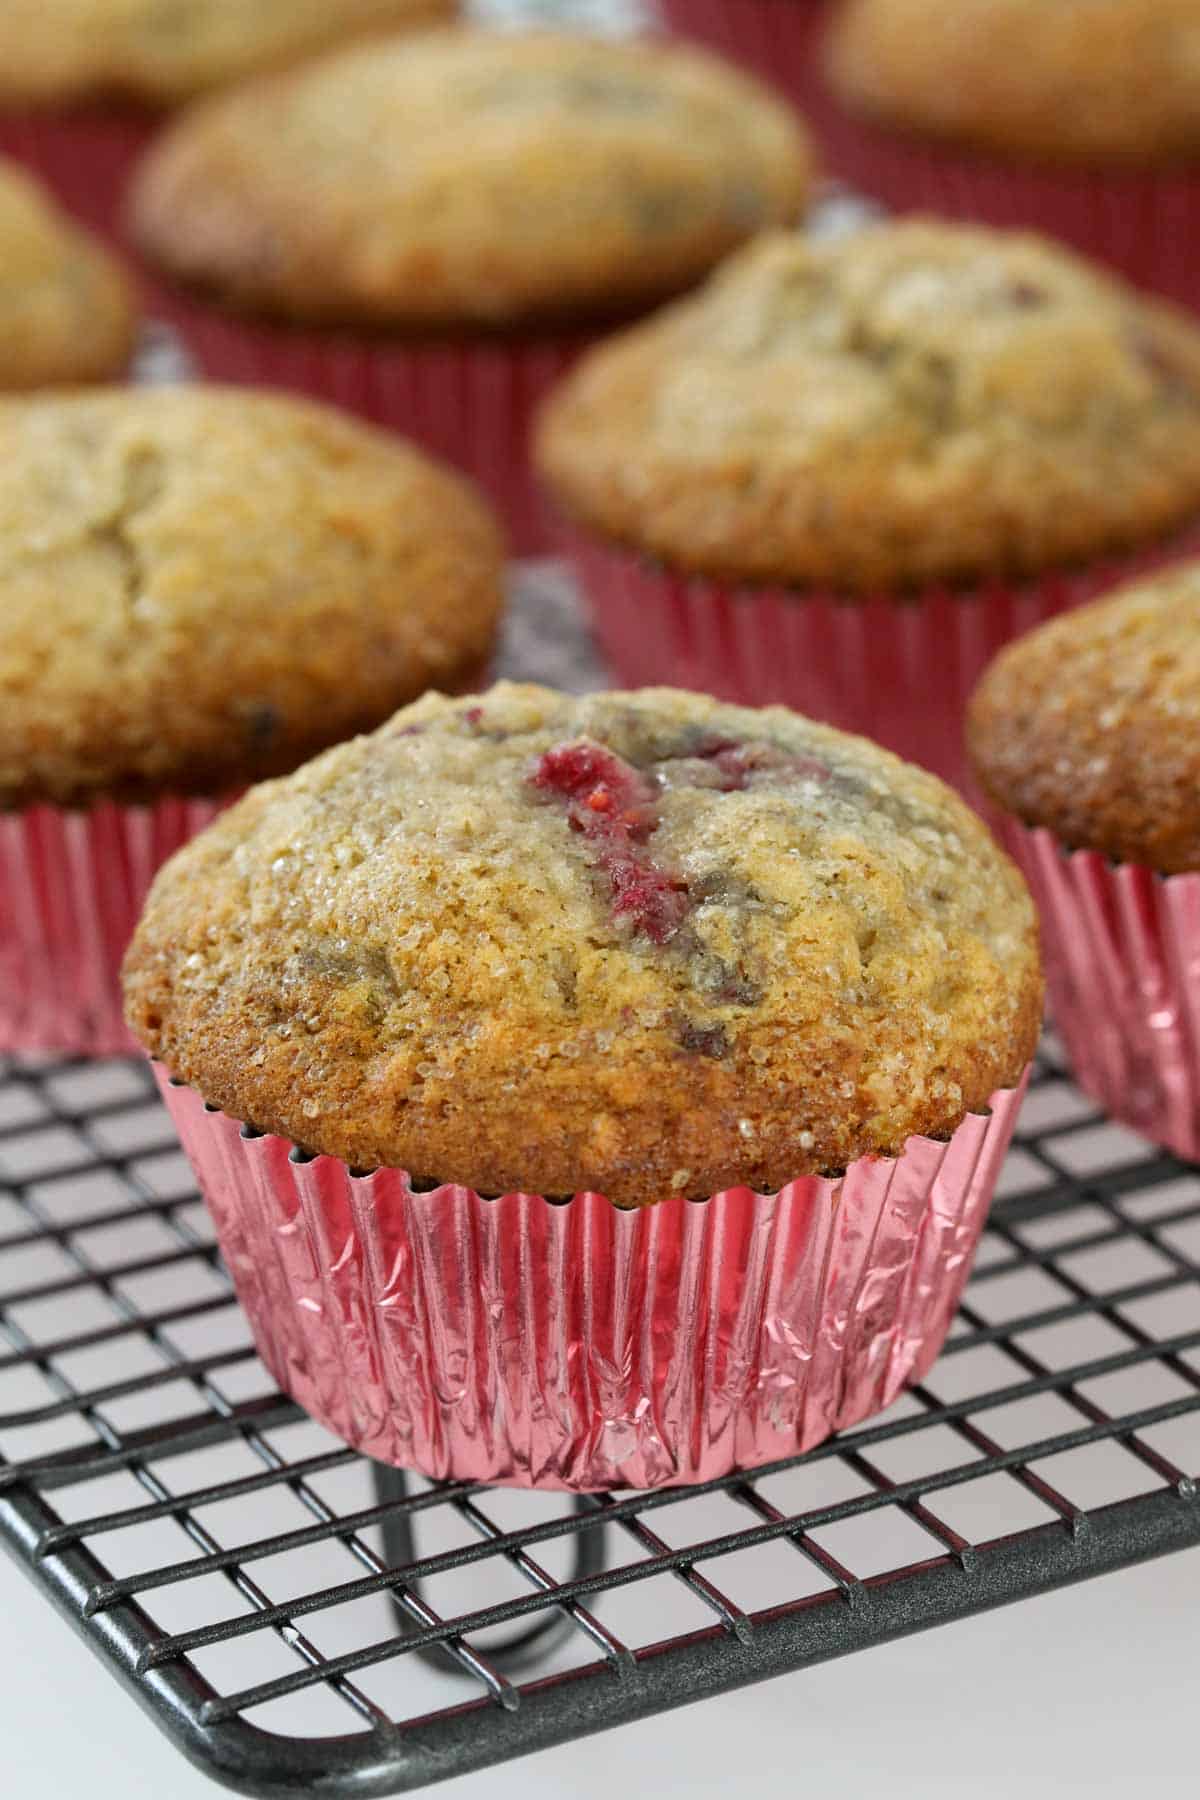 Banana raspberry muffins baked in shiny pink paper cases.